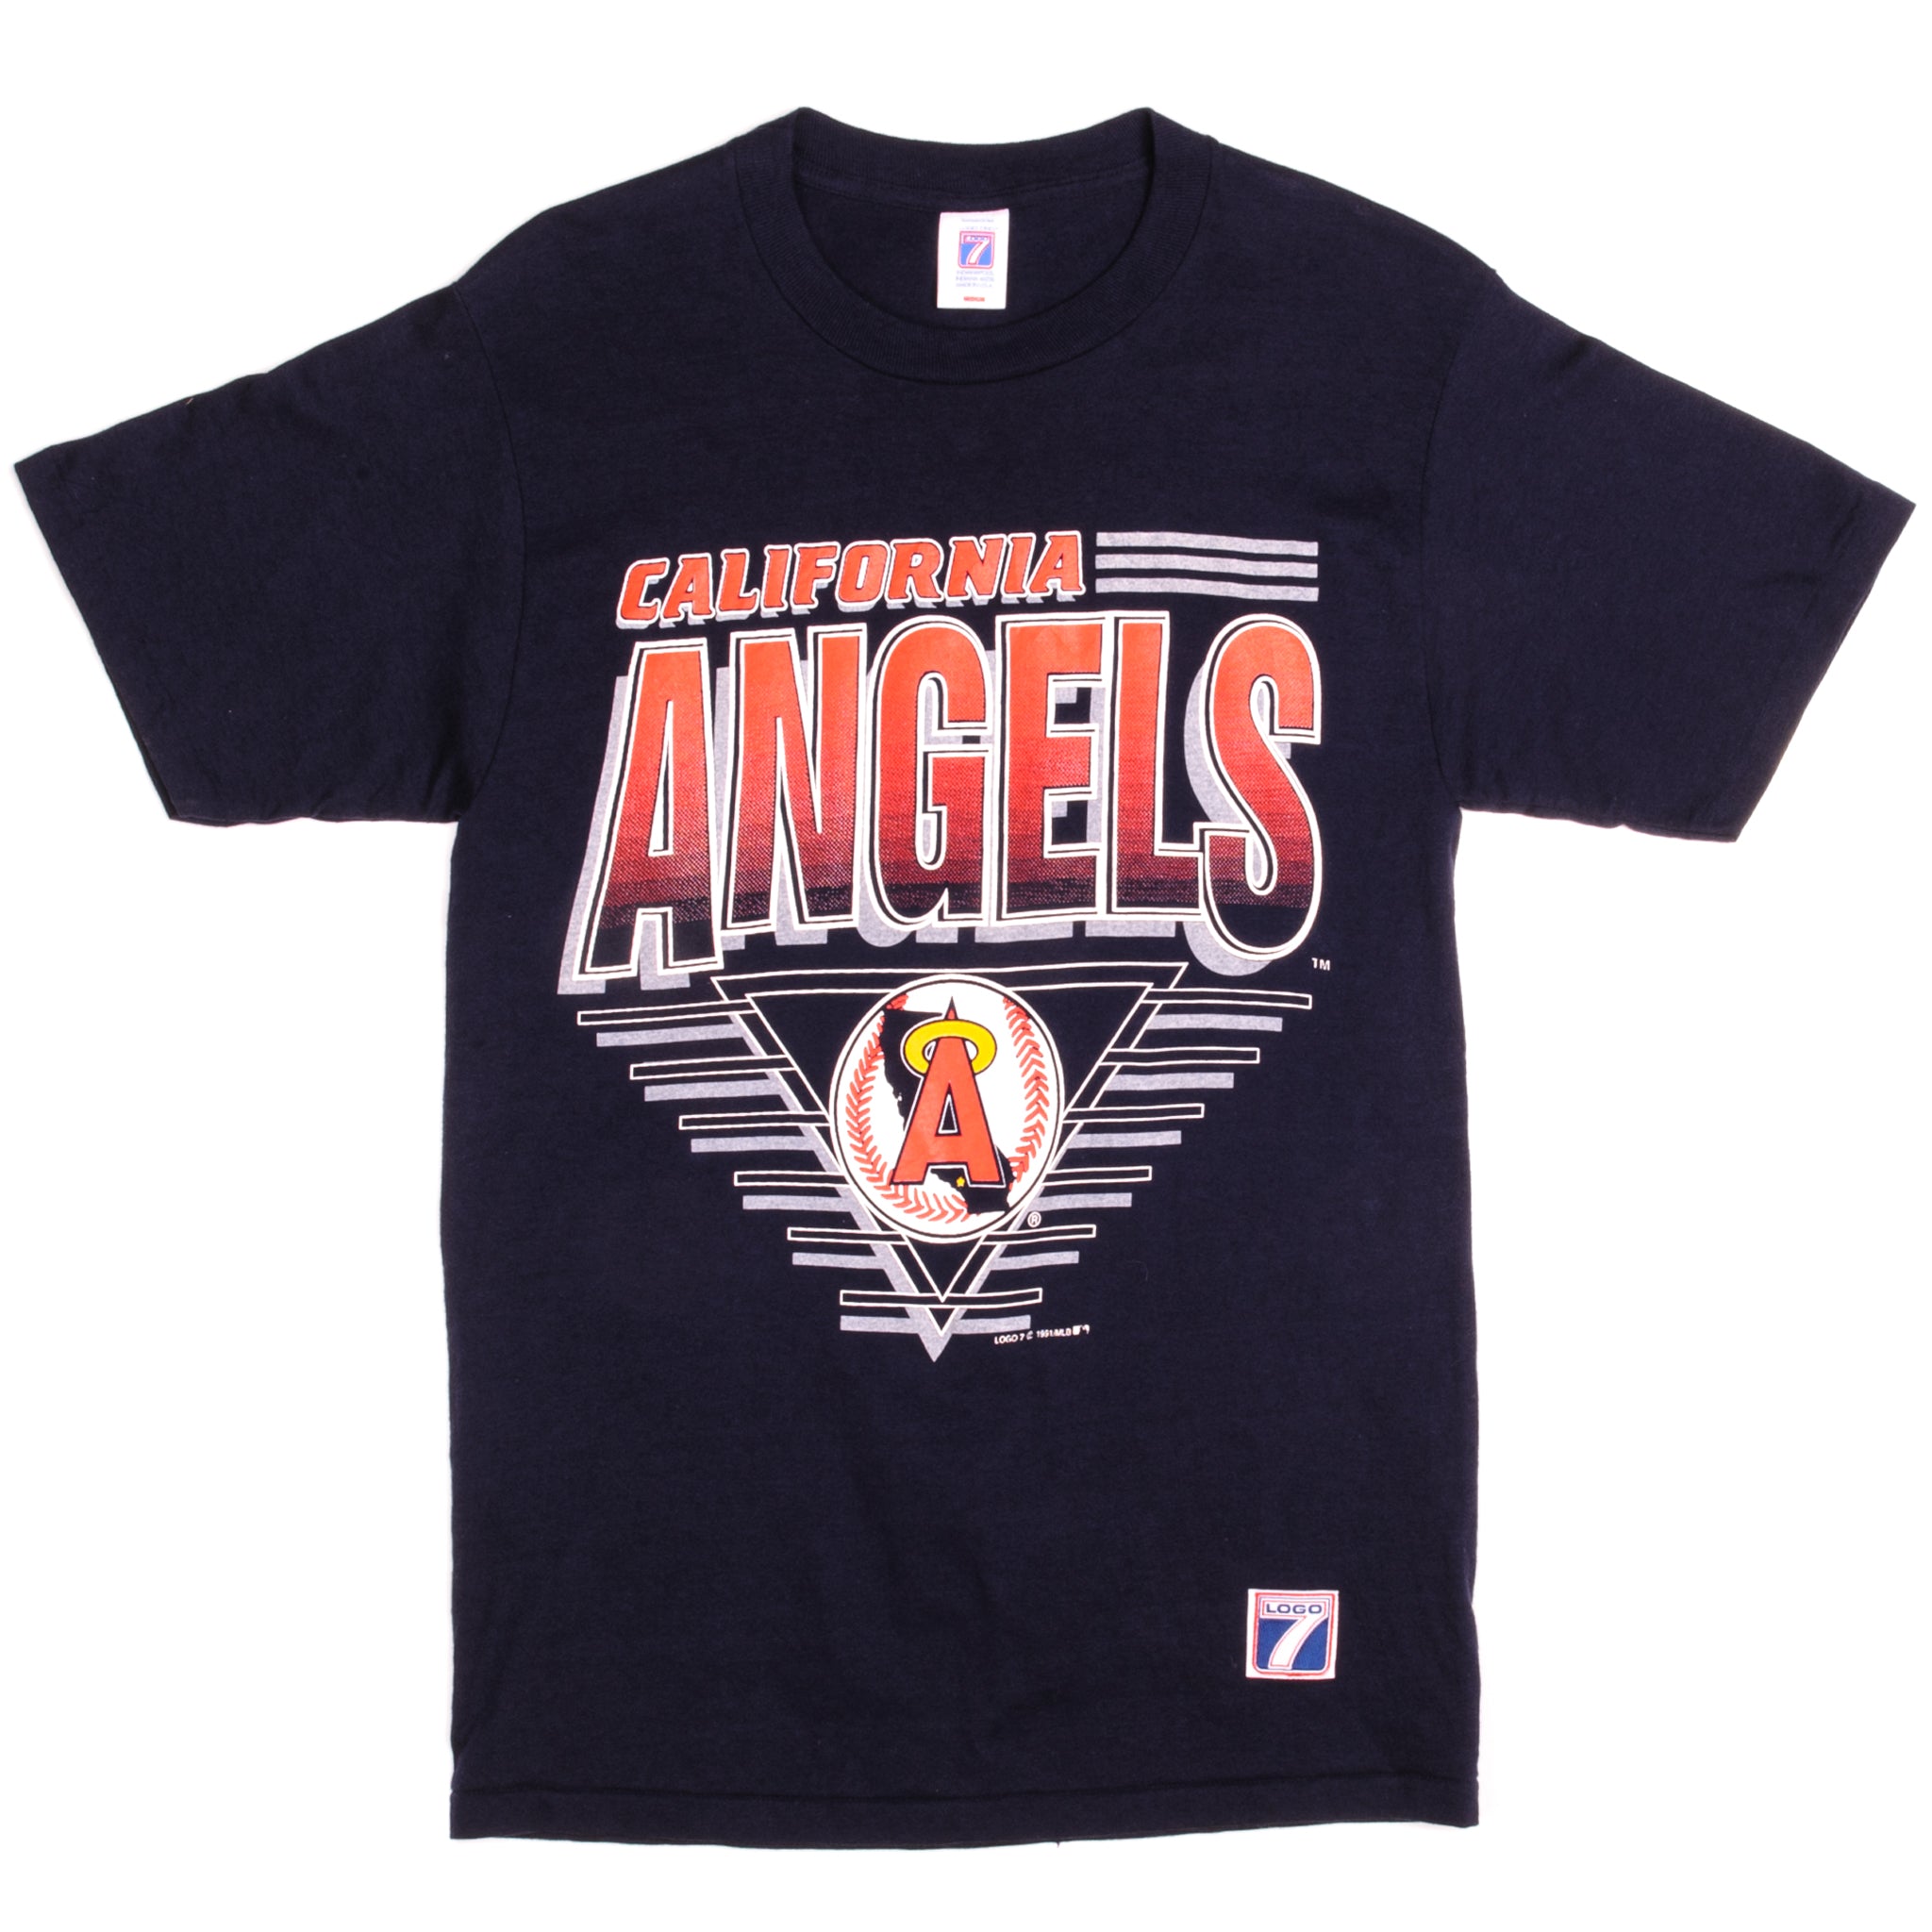 Vintage MLB California Angels Tee Shirt 1991 Size Small Made in USA